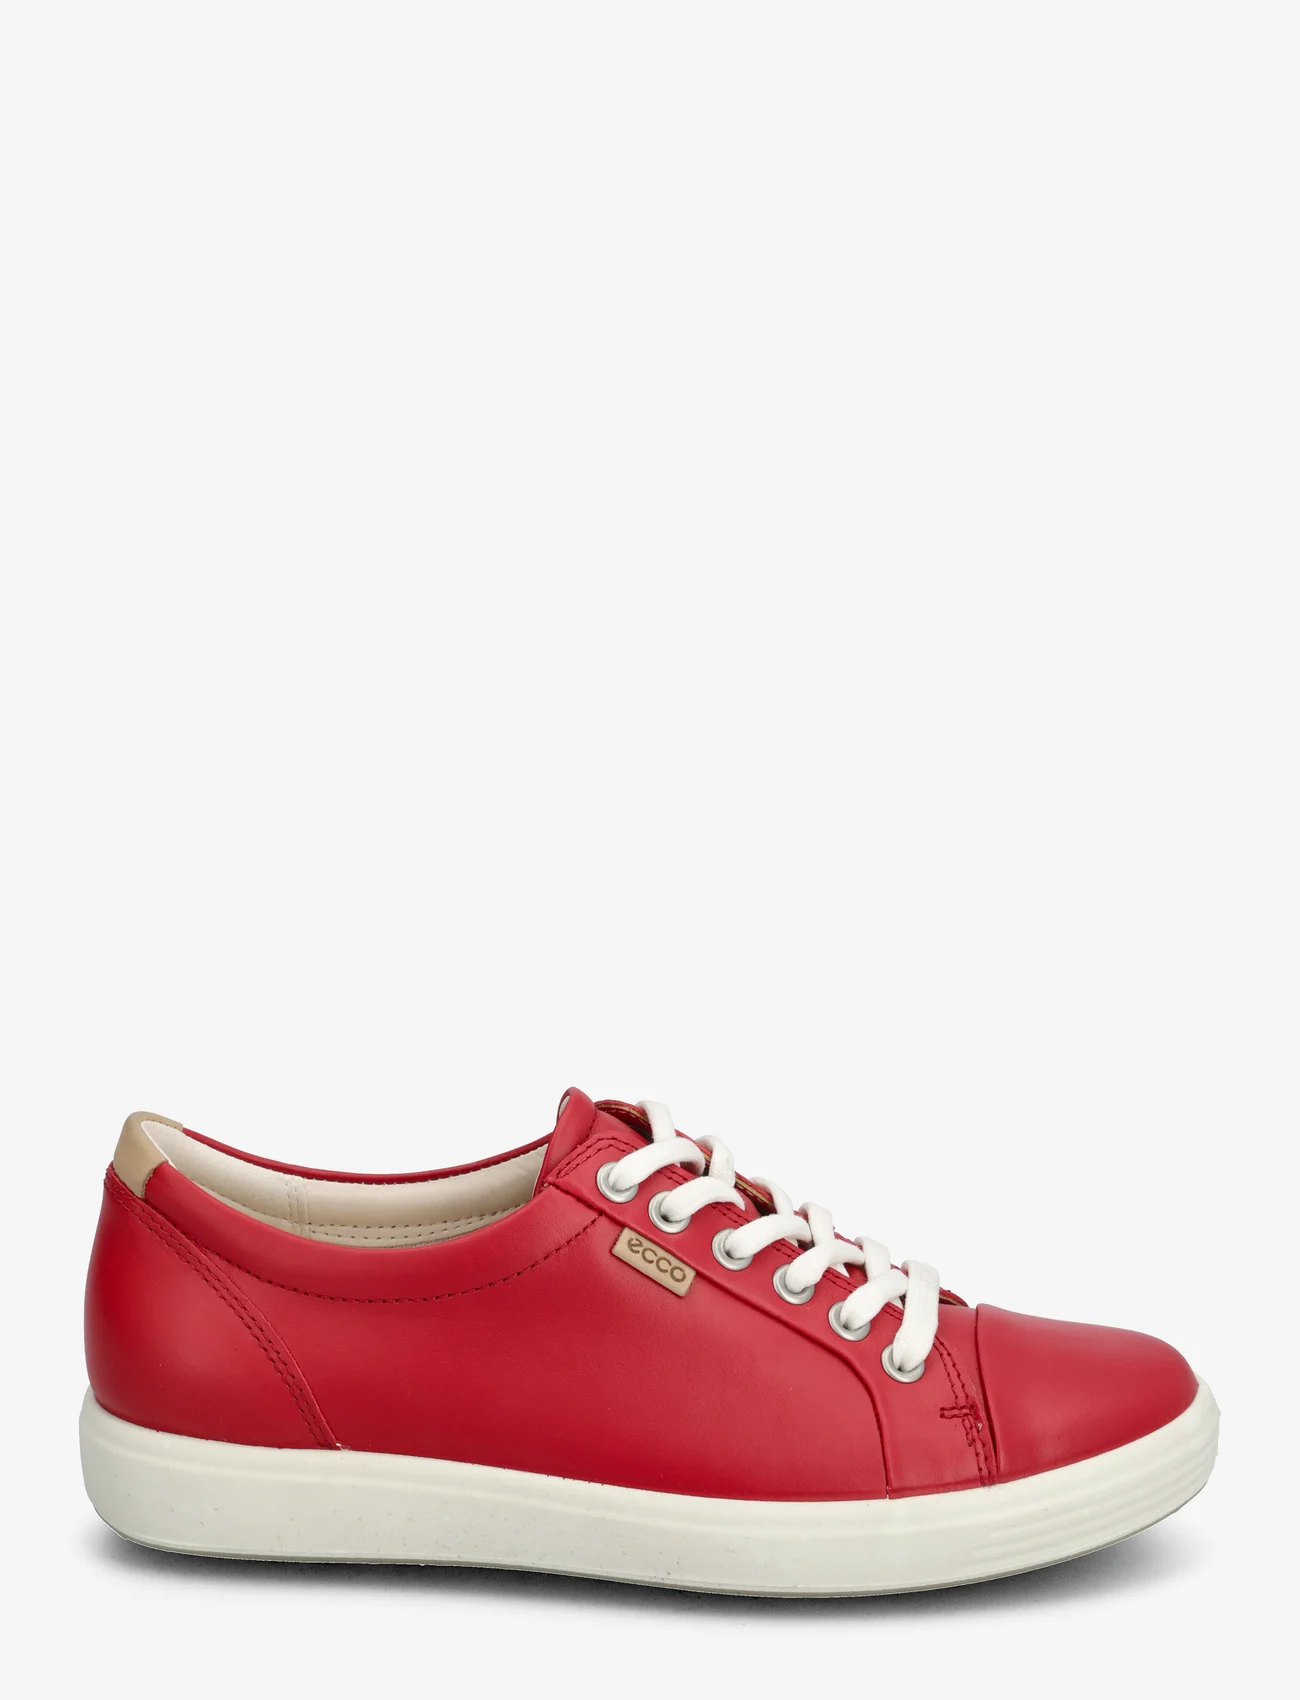 ECCO - SOFT 7 W - sneakers med lavt skaft - chili red - 1